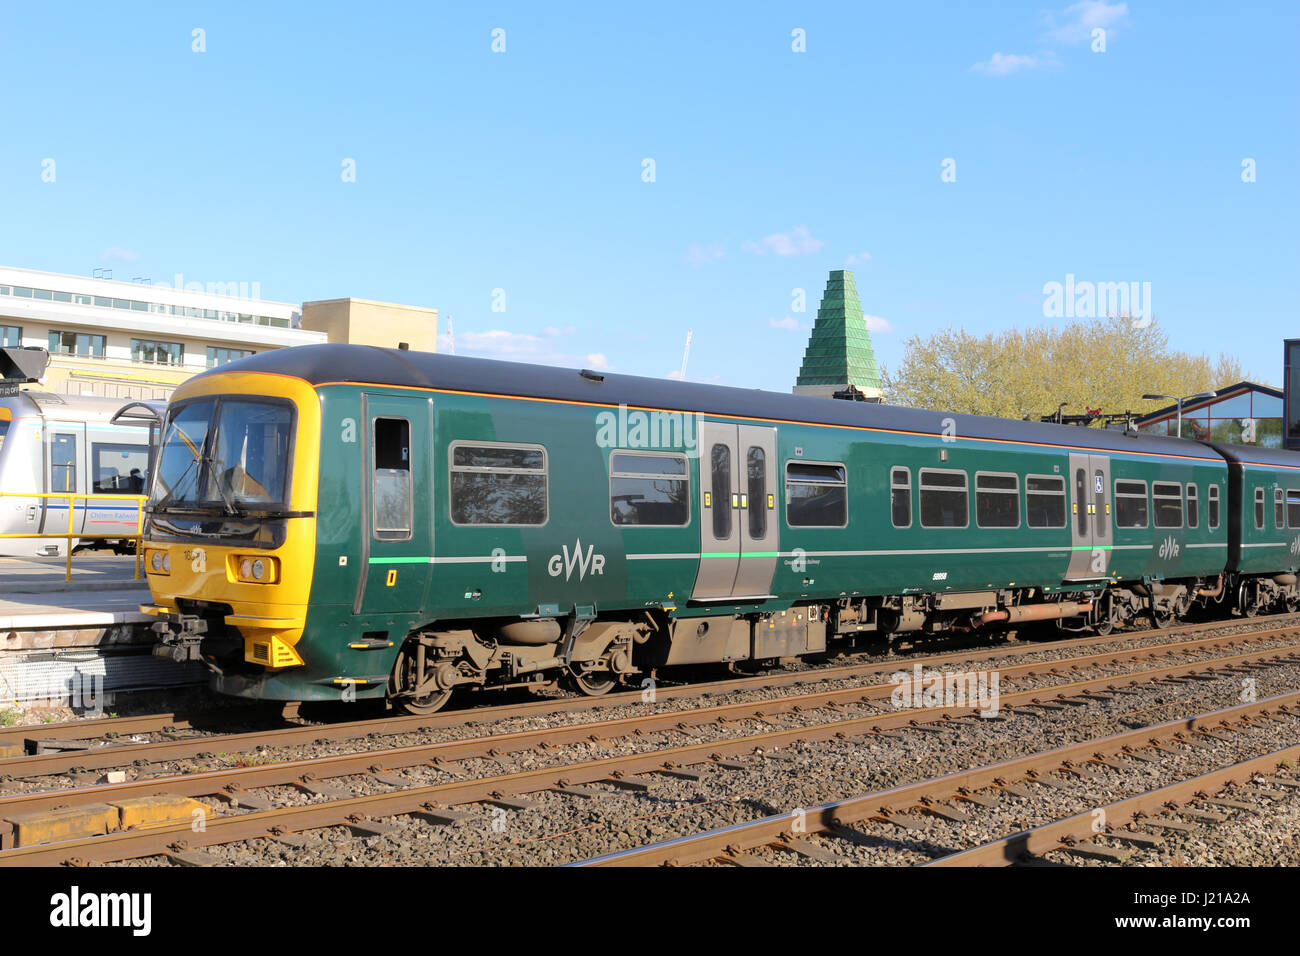 Class 165 turbo diesel multiple unit train in Great Western Railway green livery at Oxford station with passenger service for London Paddington. Stock Photo